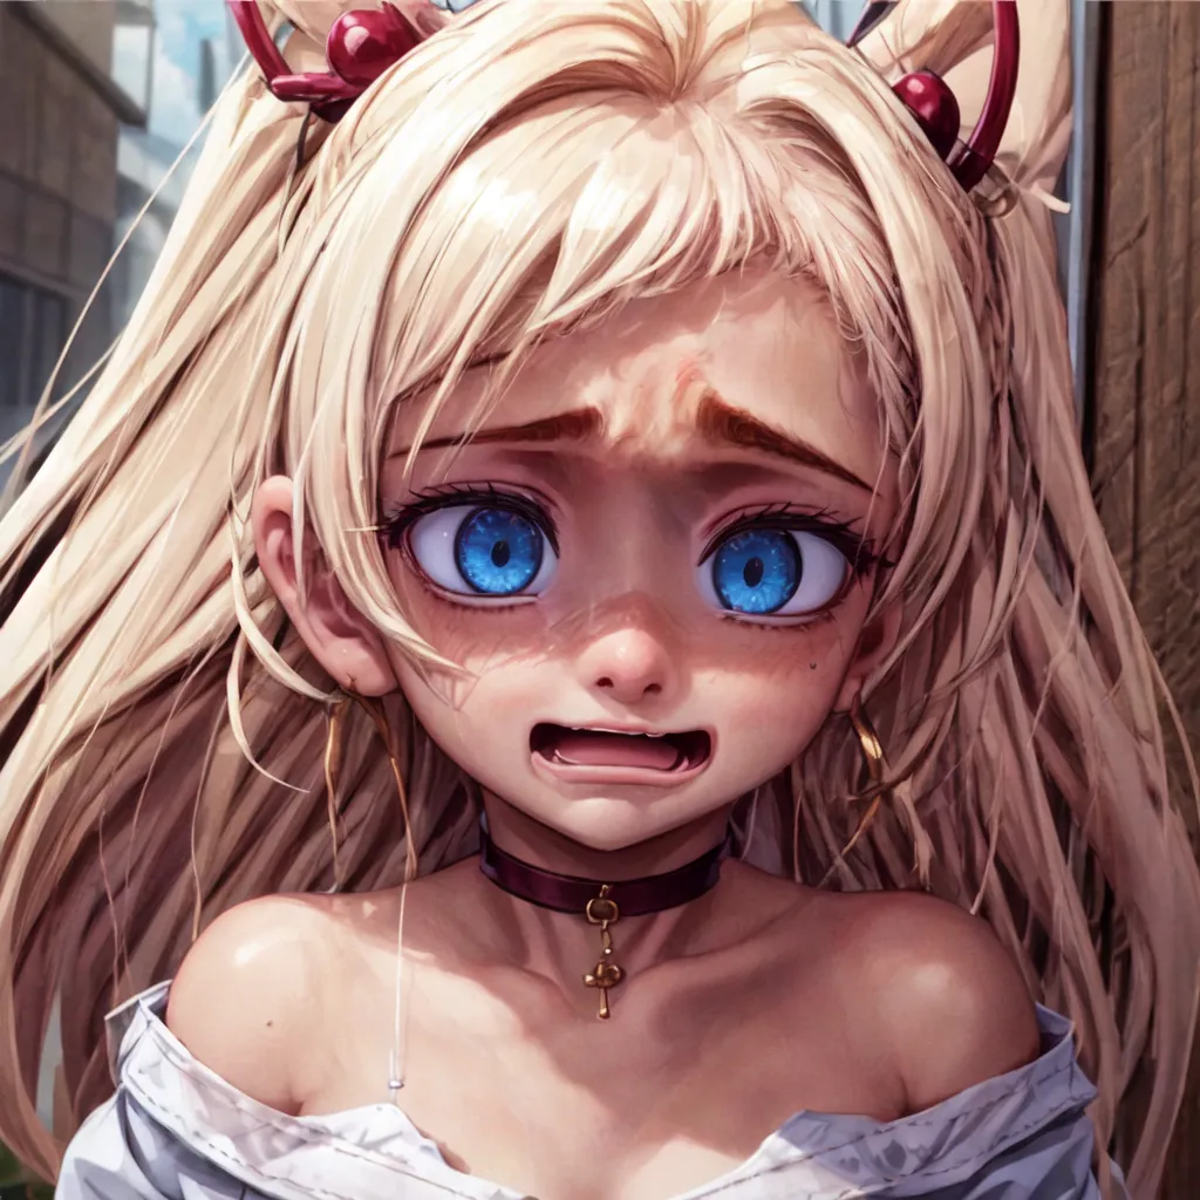 Scared - Facial Expression of Fear image by slime77744784